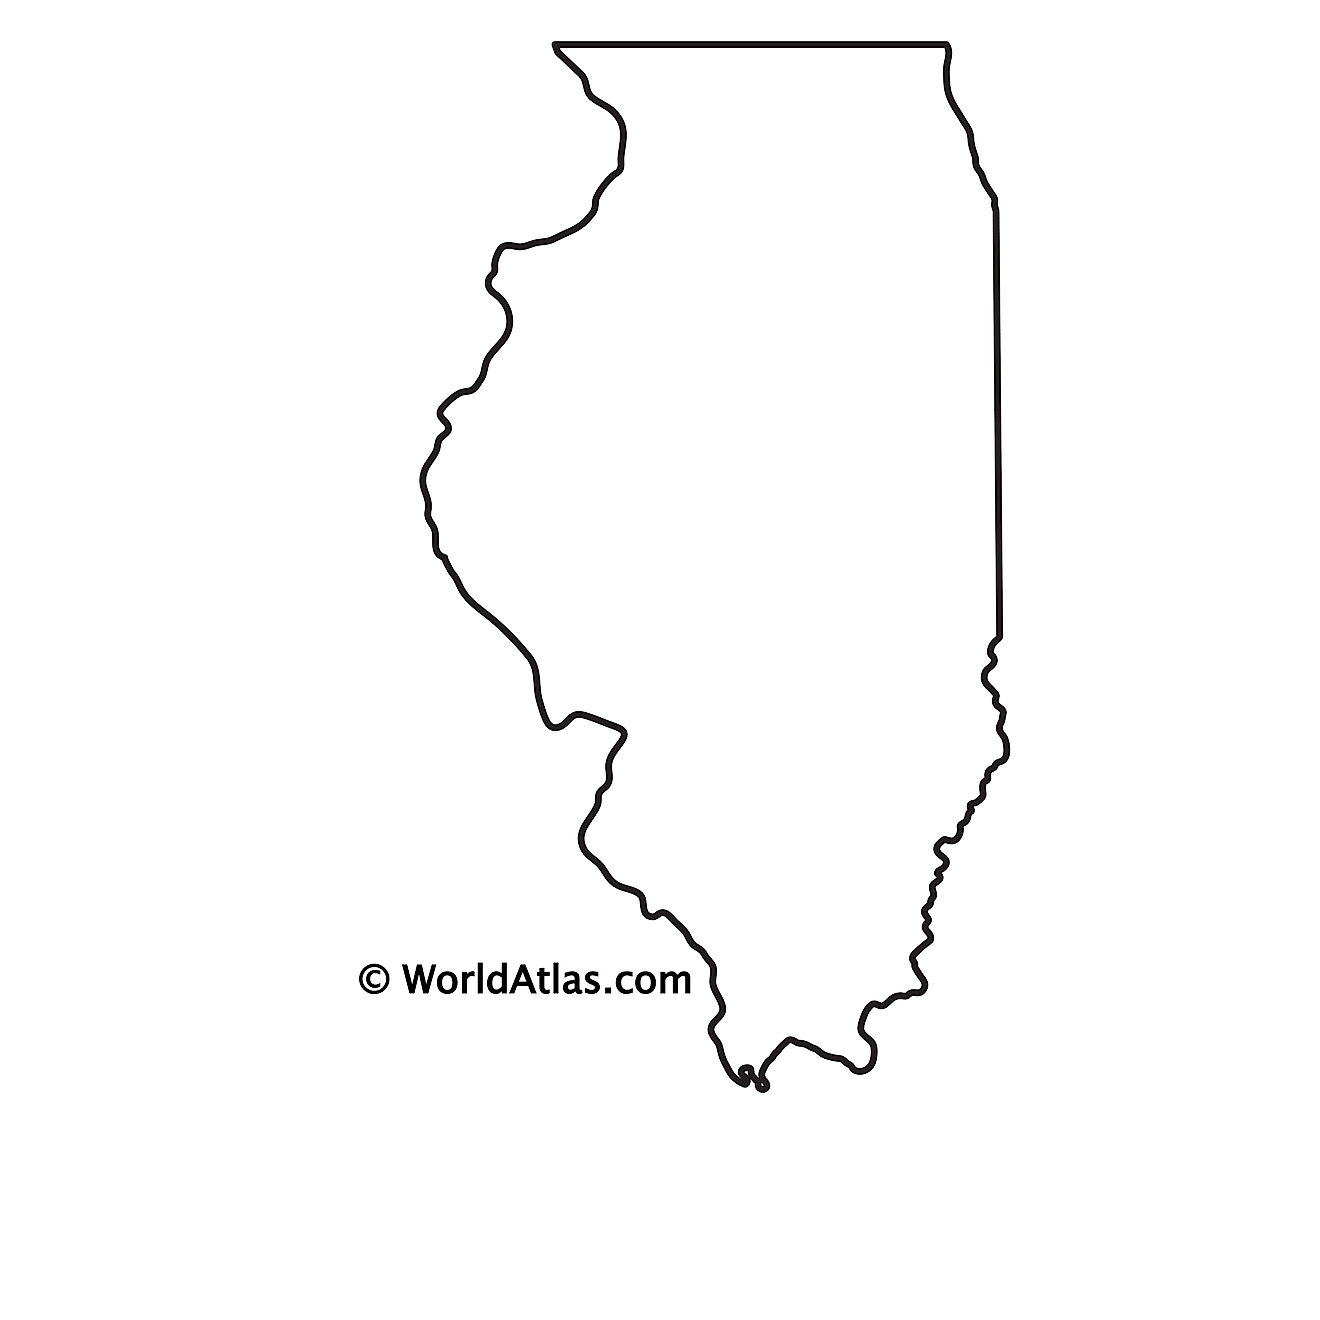 Blank Outline Map of Illinois